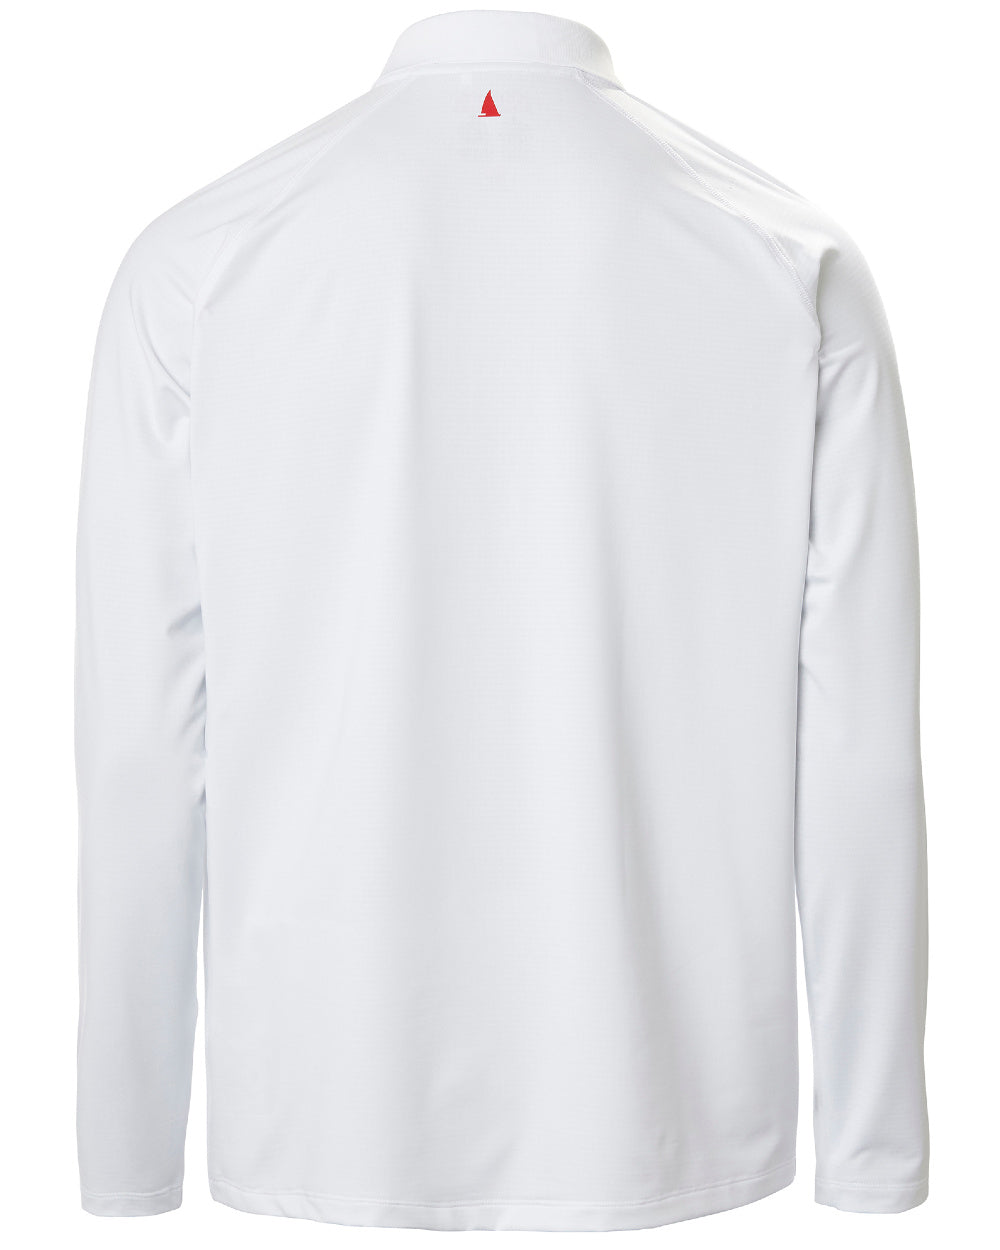 White Coloured Musto Evolution Sunblock Long Sleeve Polo Shirt 2.0 On A White Background 